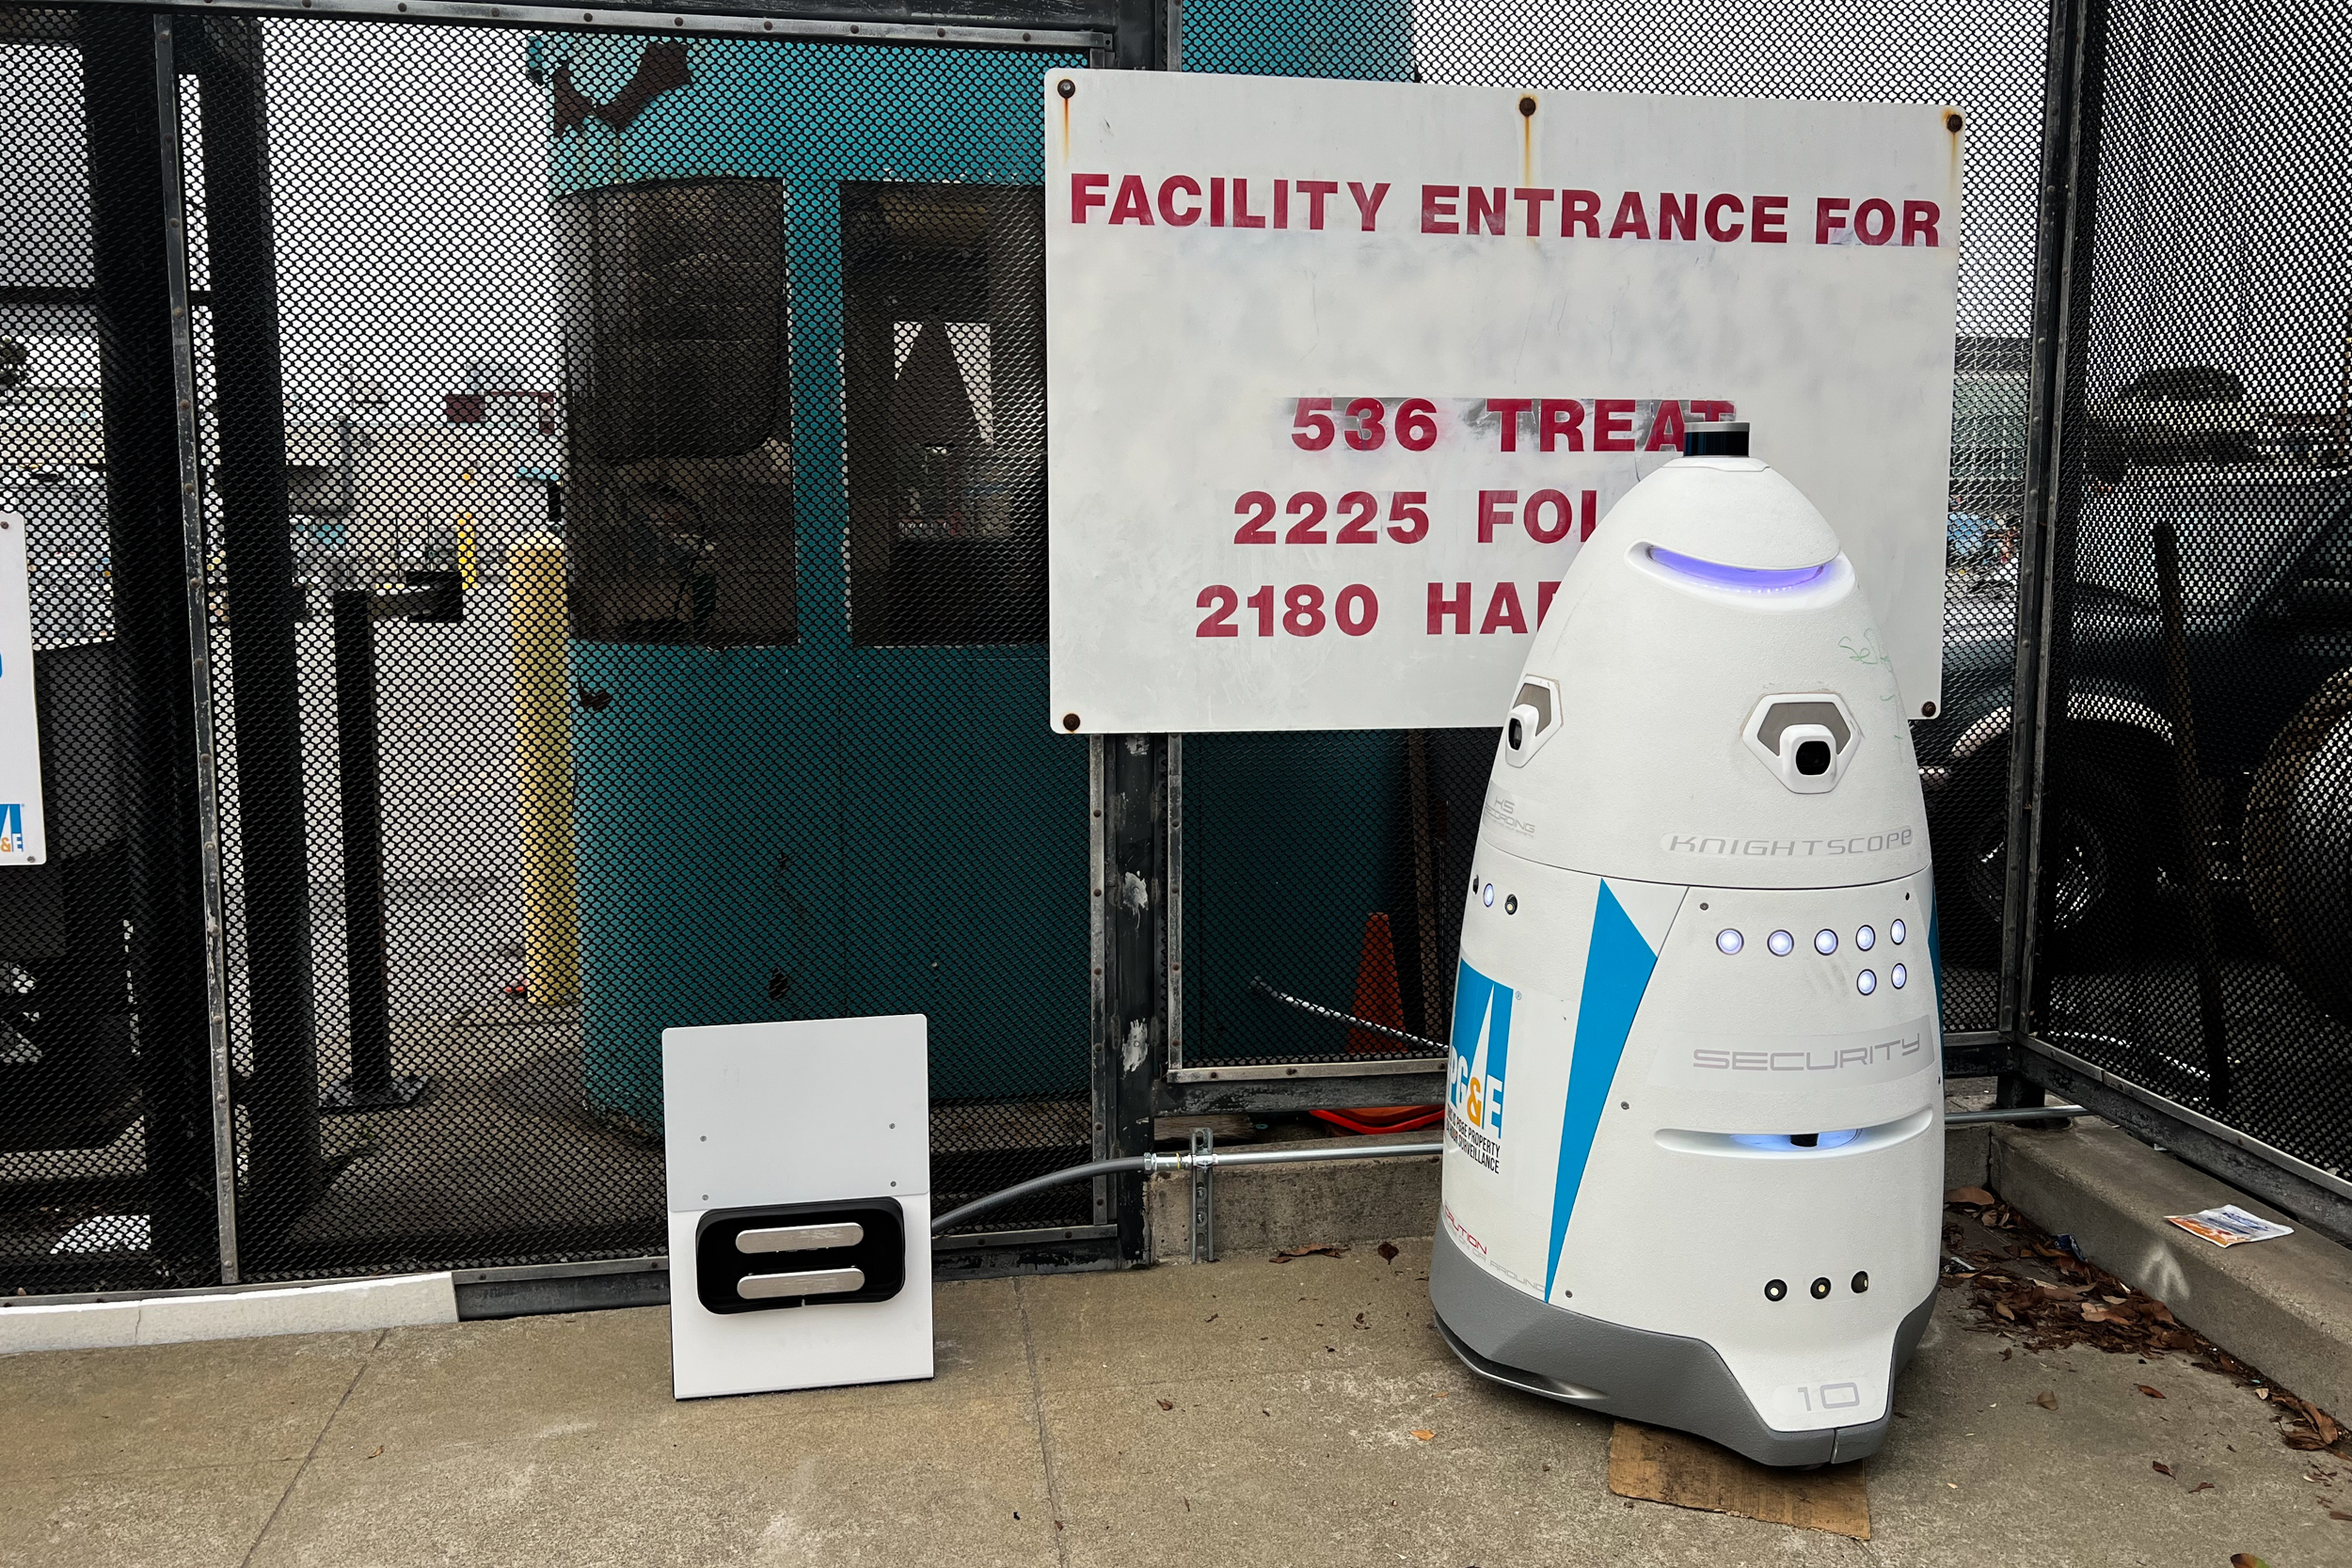 The robot security guard patrolling SF is suddenly unemployed